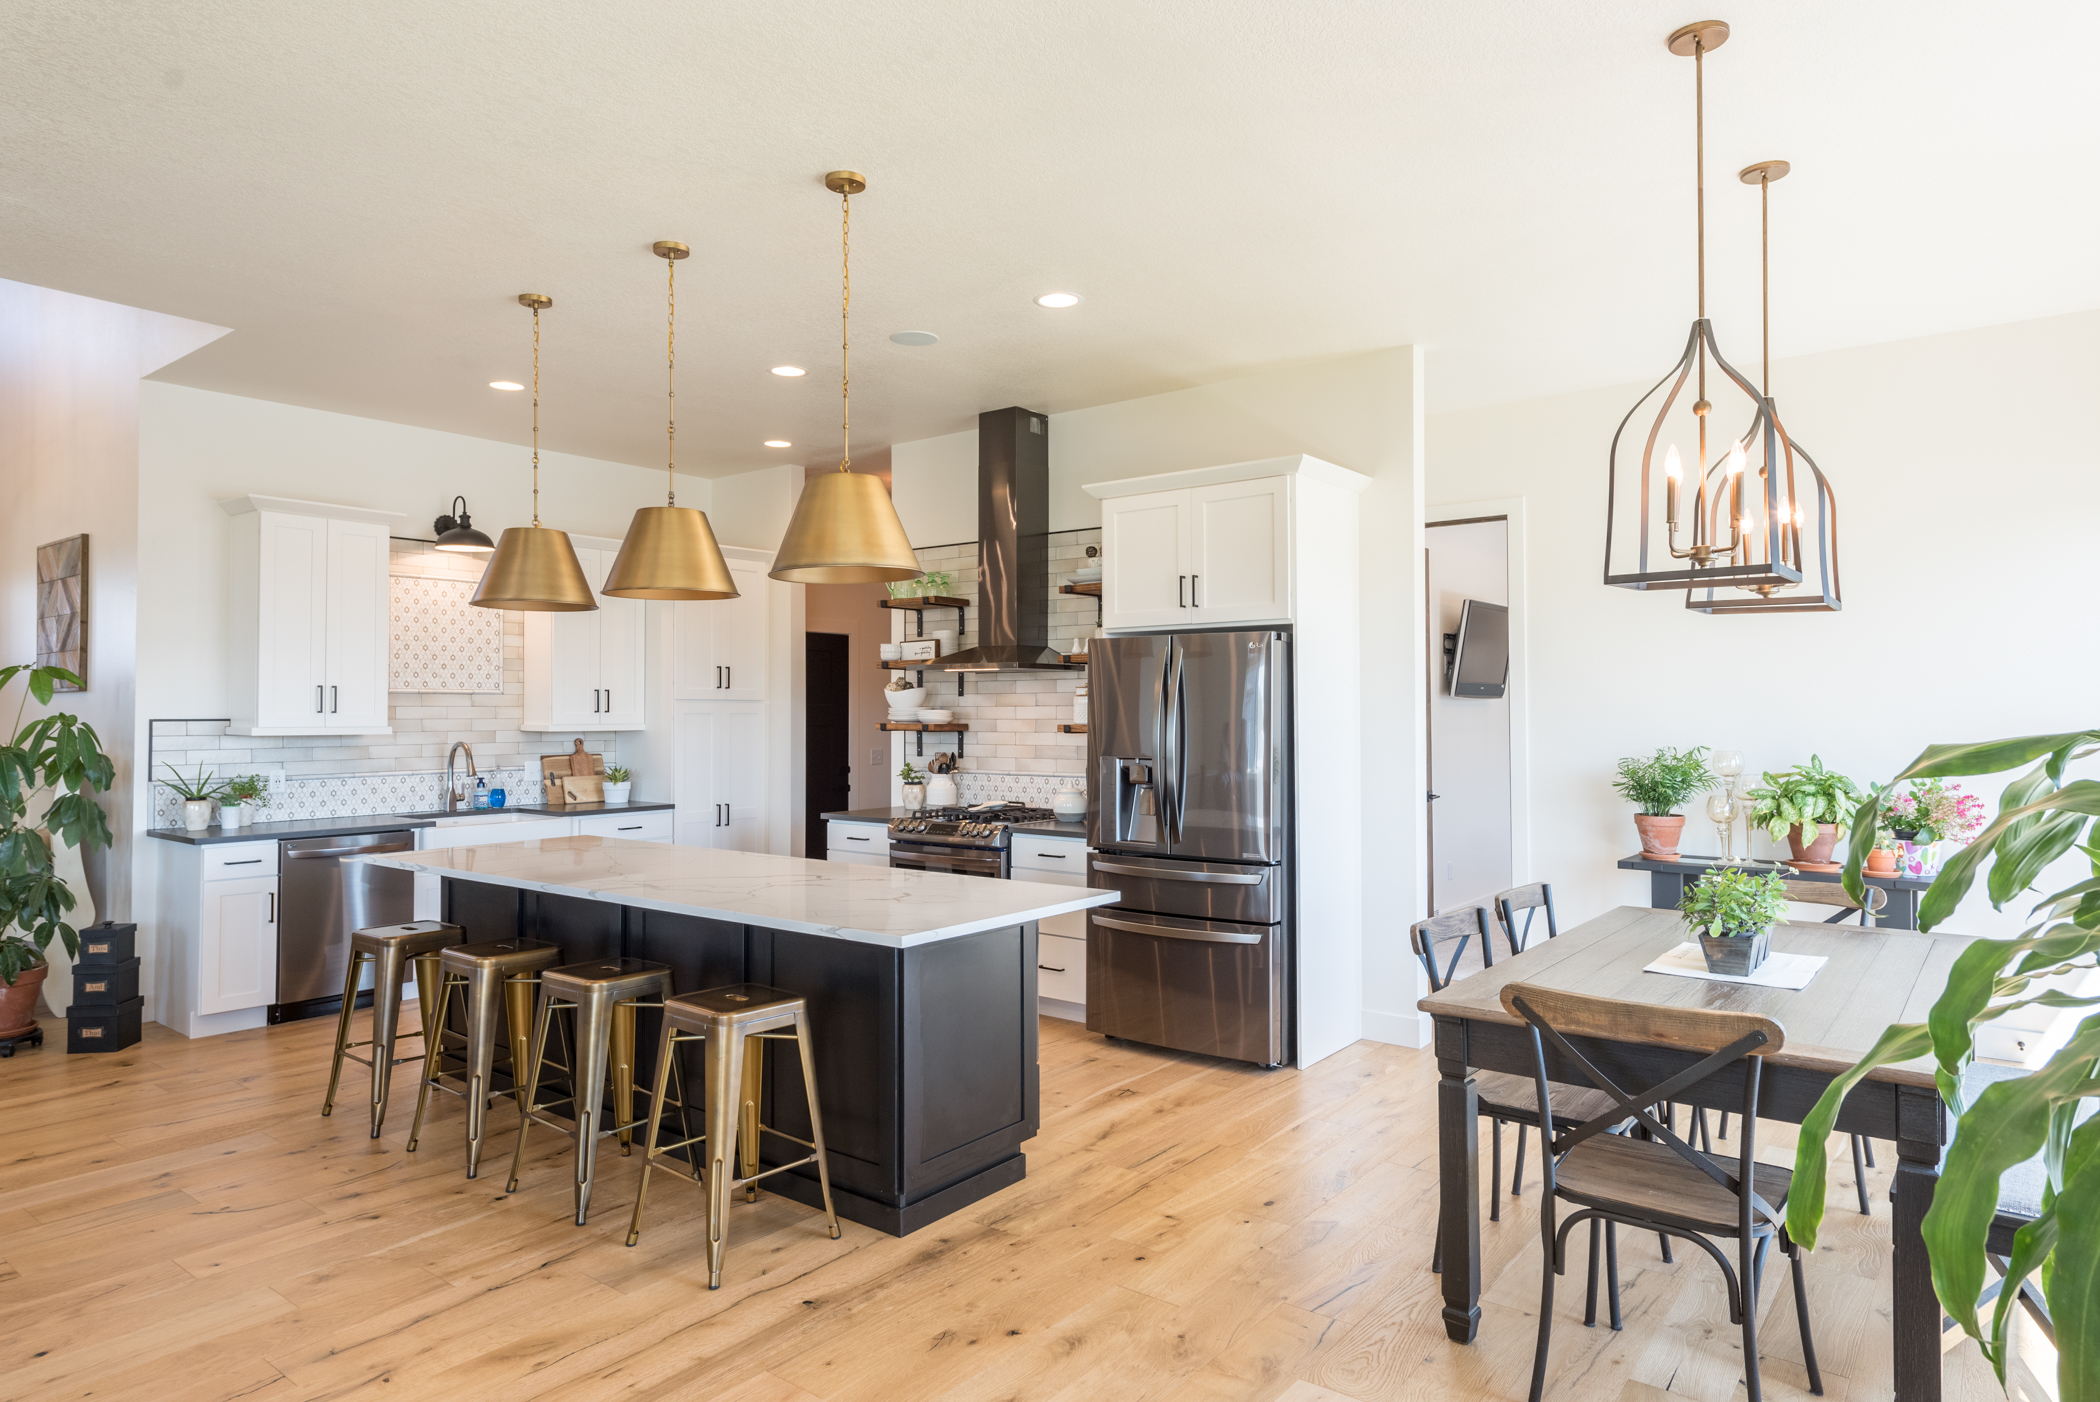 Large kitchen and dining area with hardwood floors, island and white cabinetry